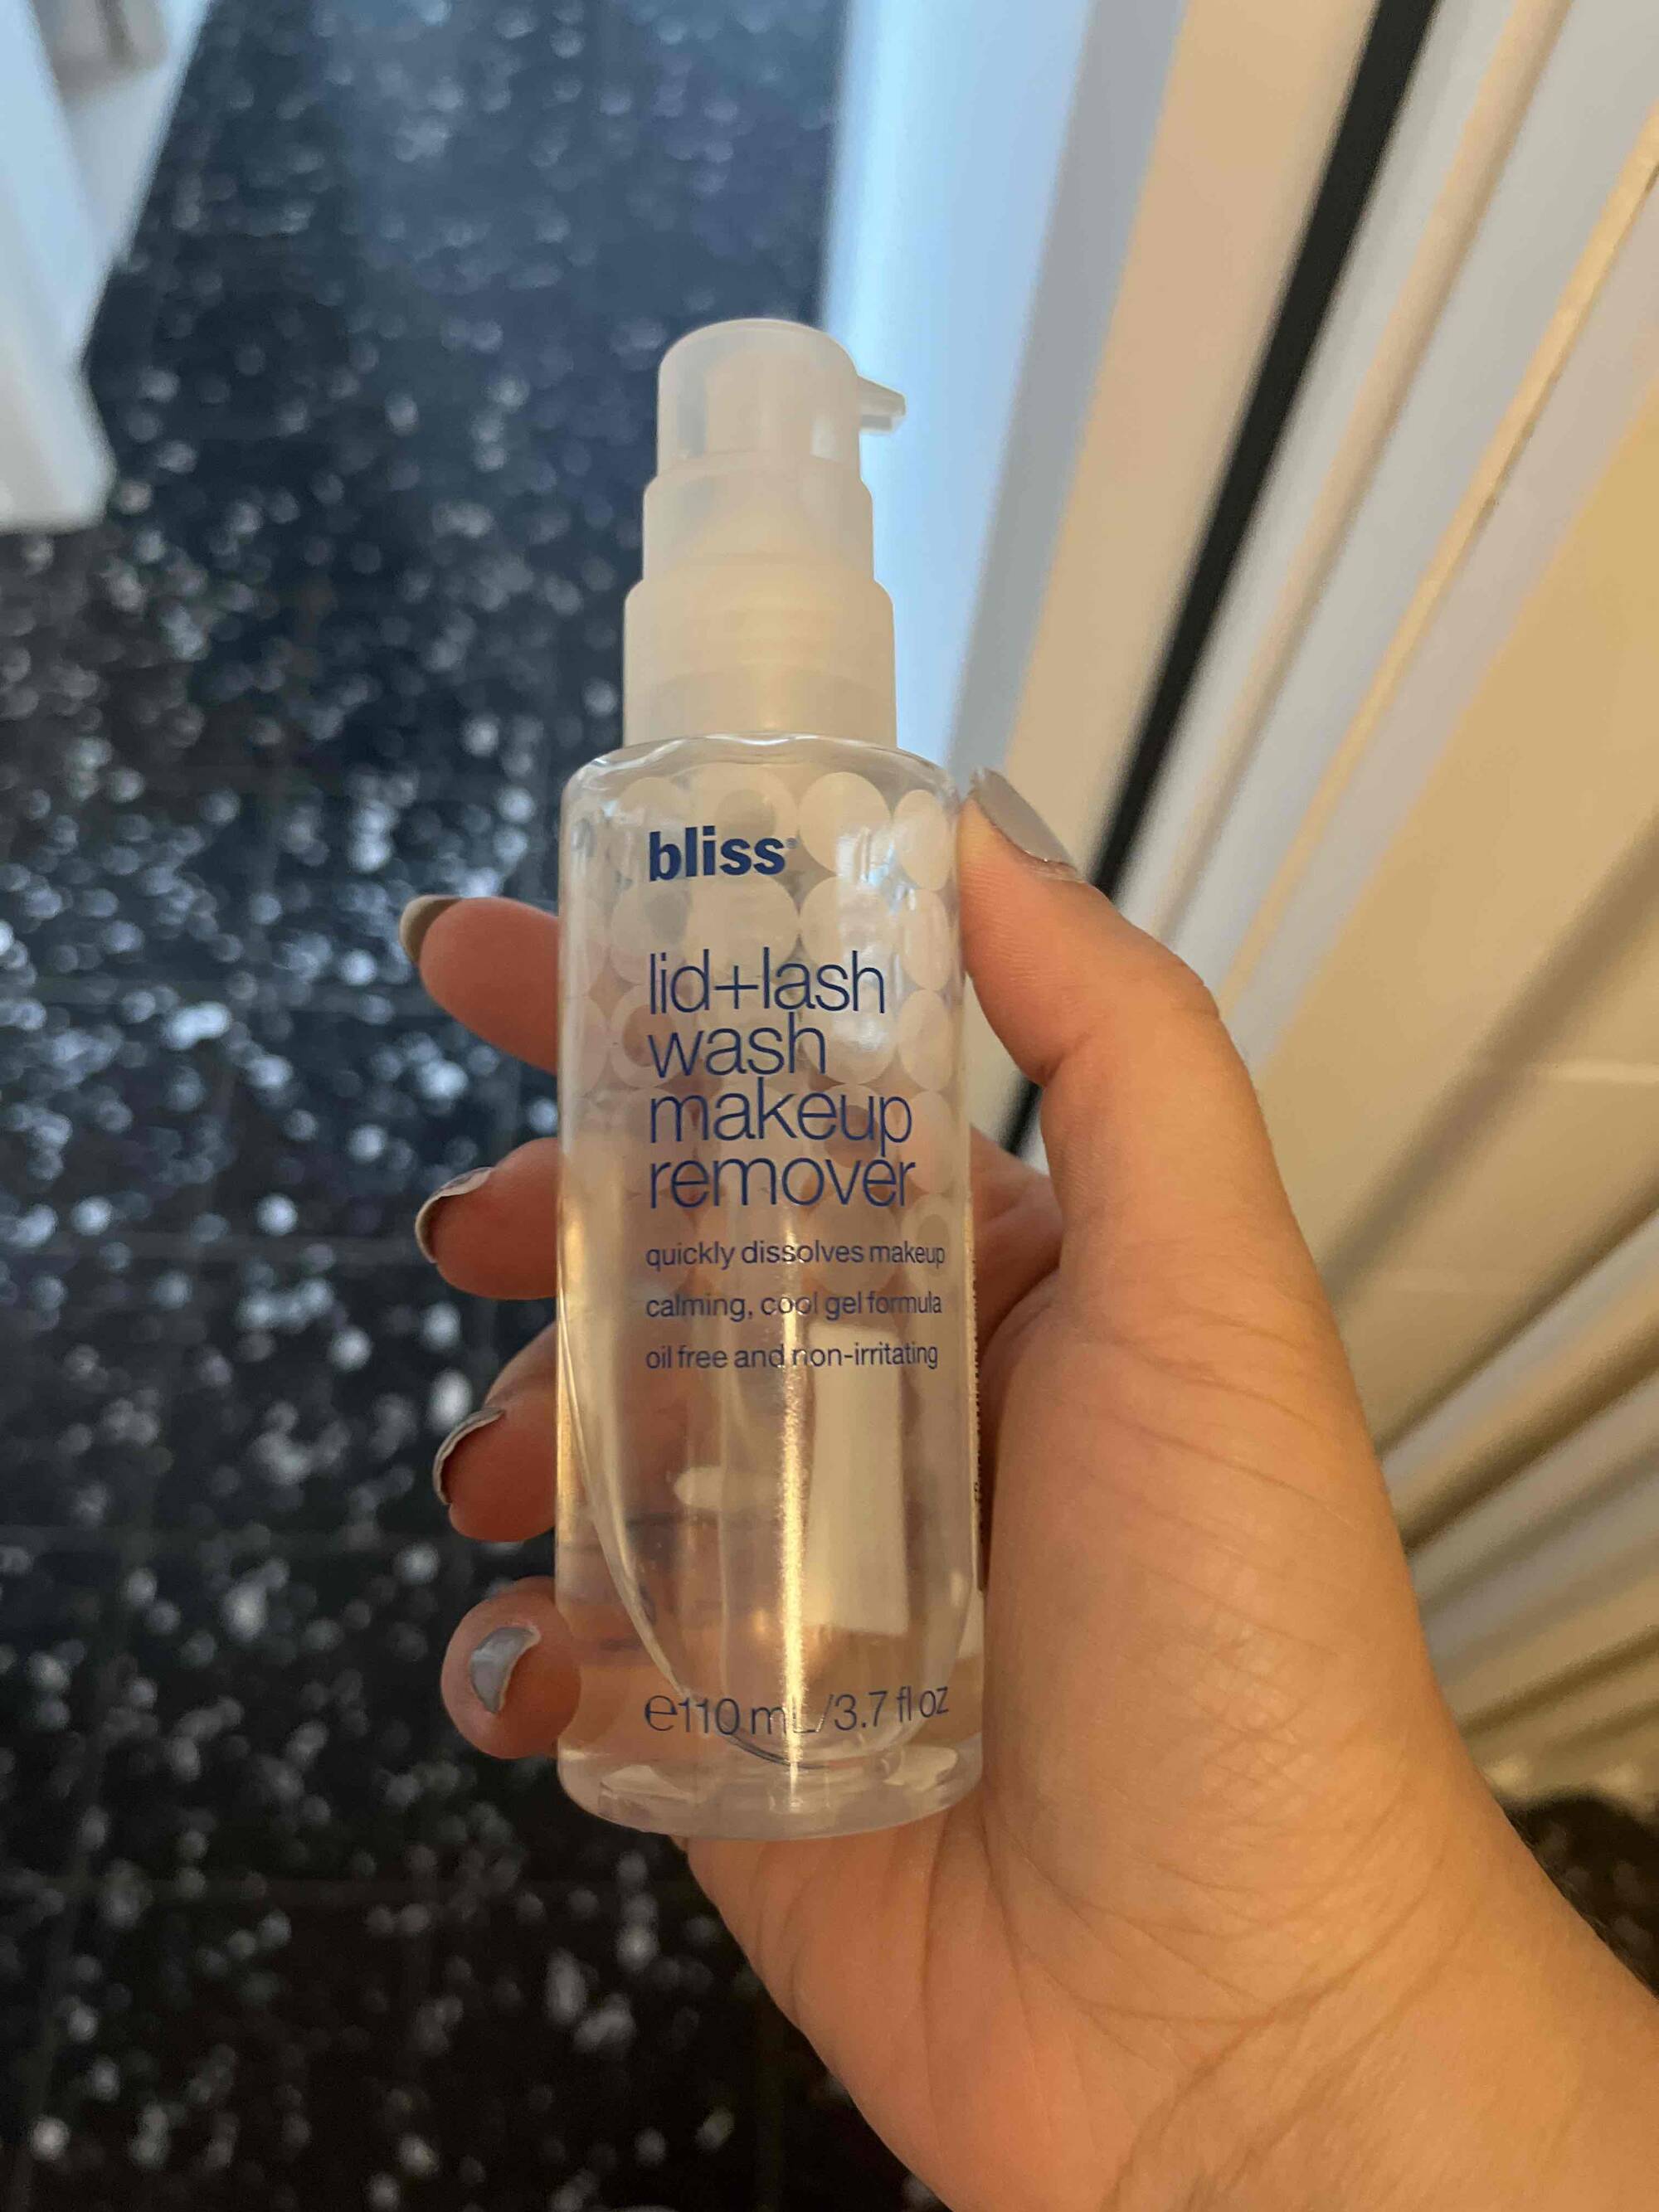 BLISS - Lid + wash - Makeup remover